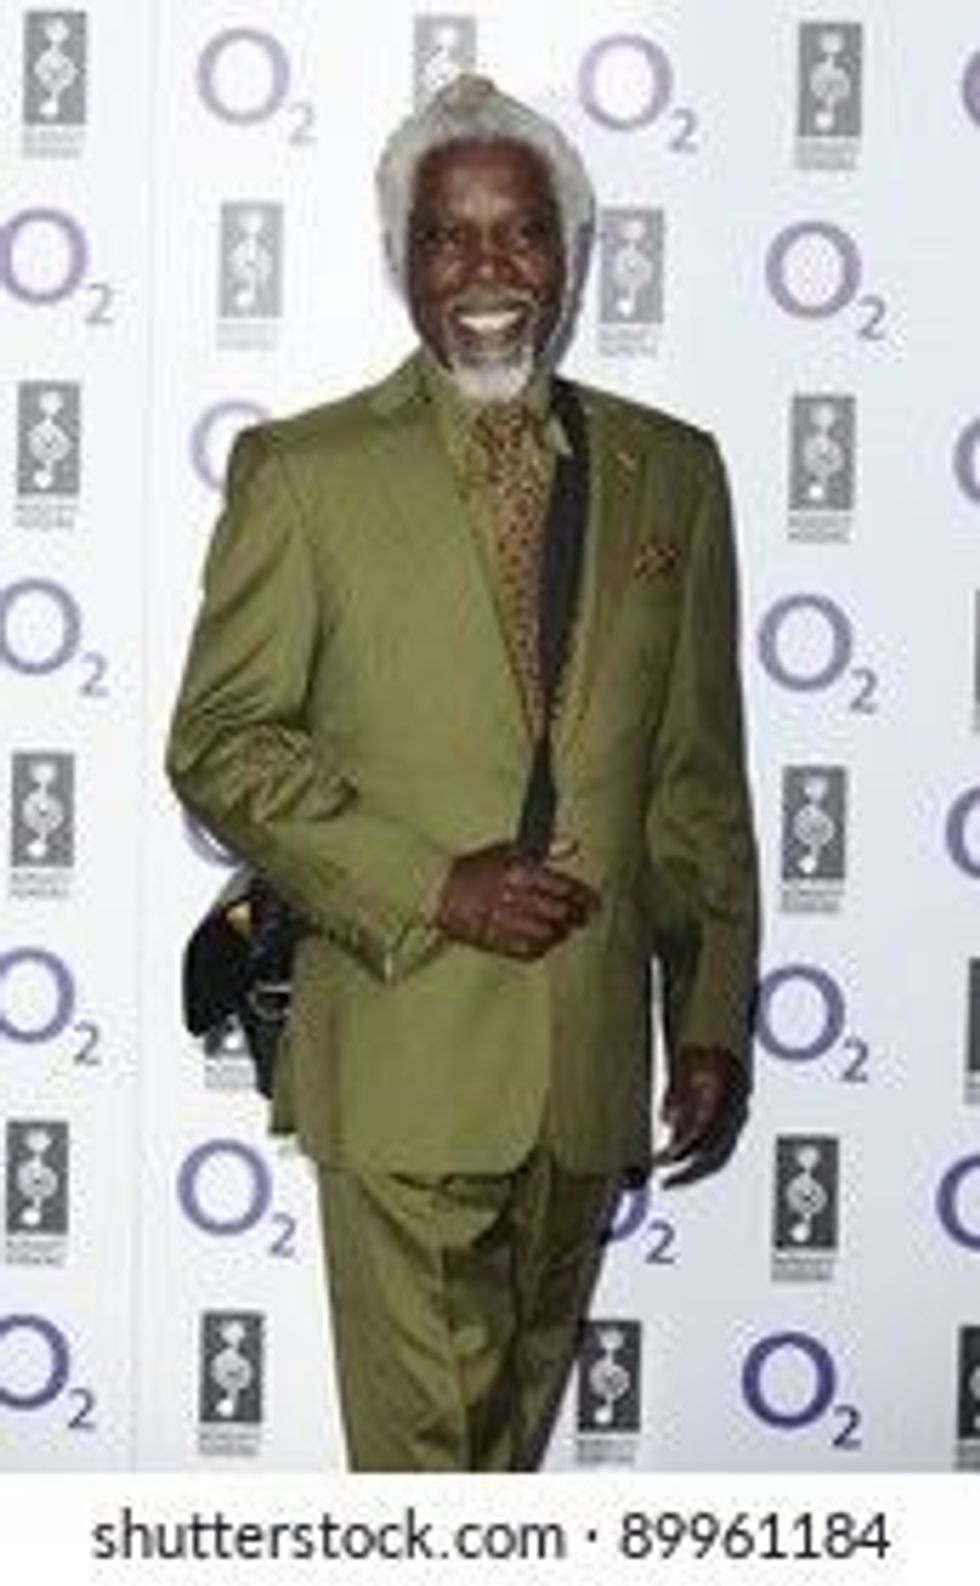 Billy Ocean walked away from his music career in 1988 but has started making a comeback in recent years!